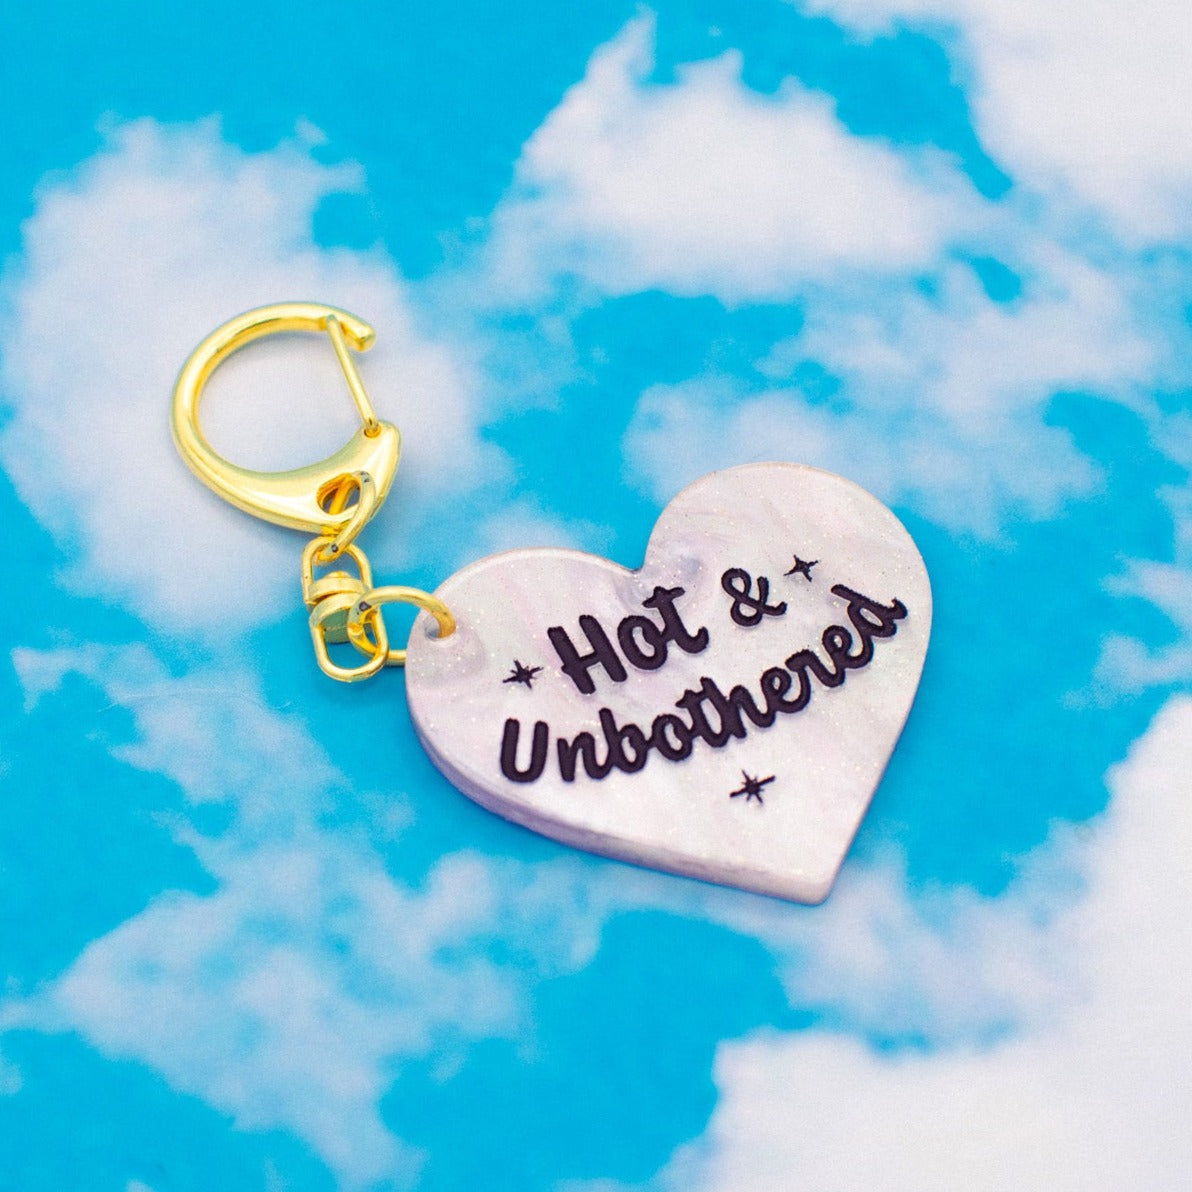 Hot & unbothered keychain